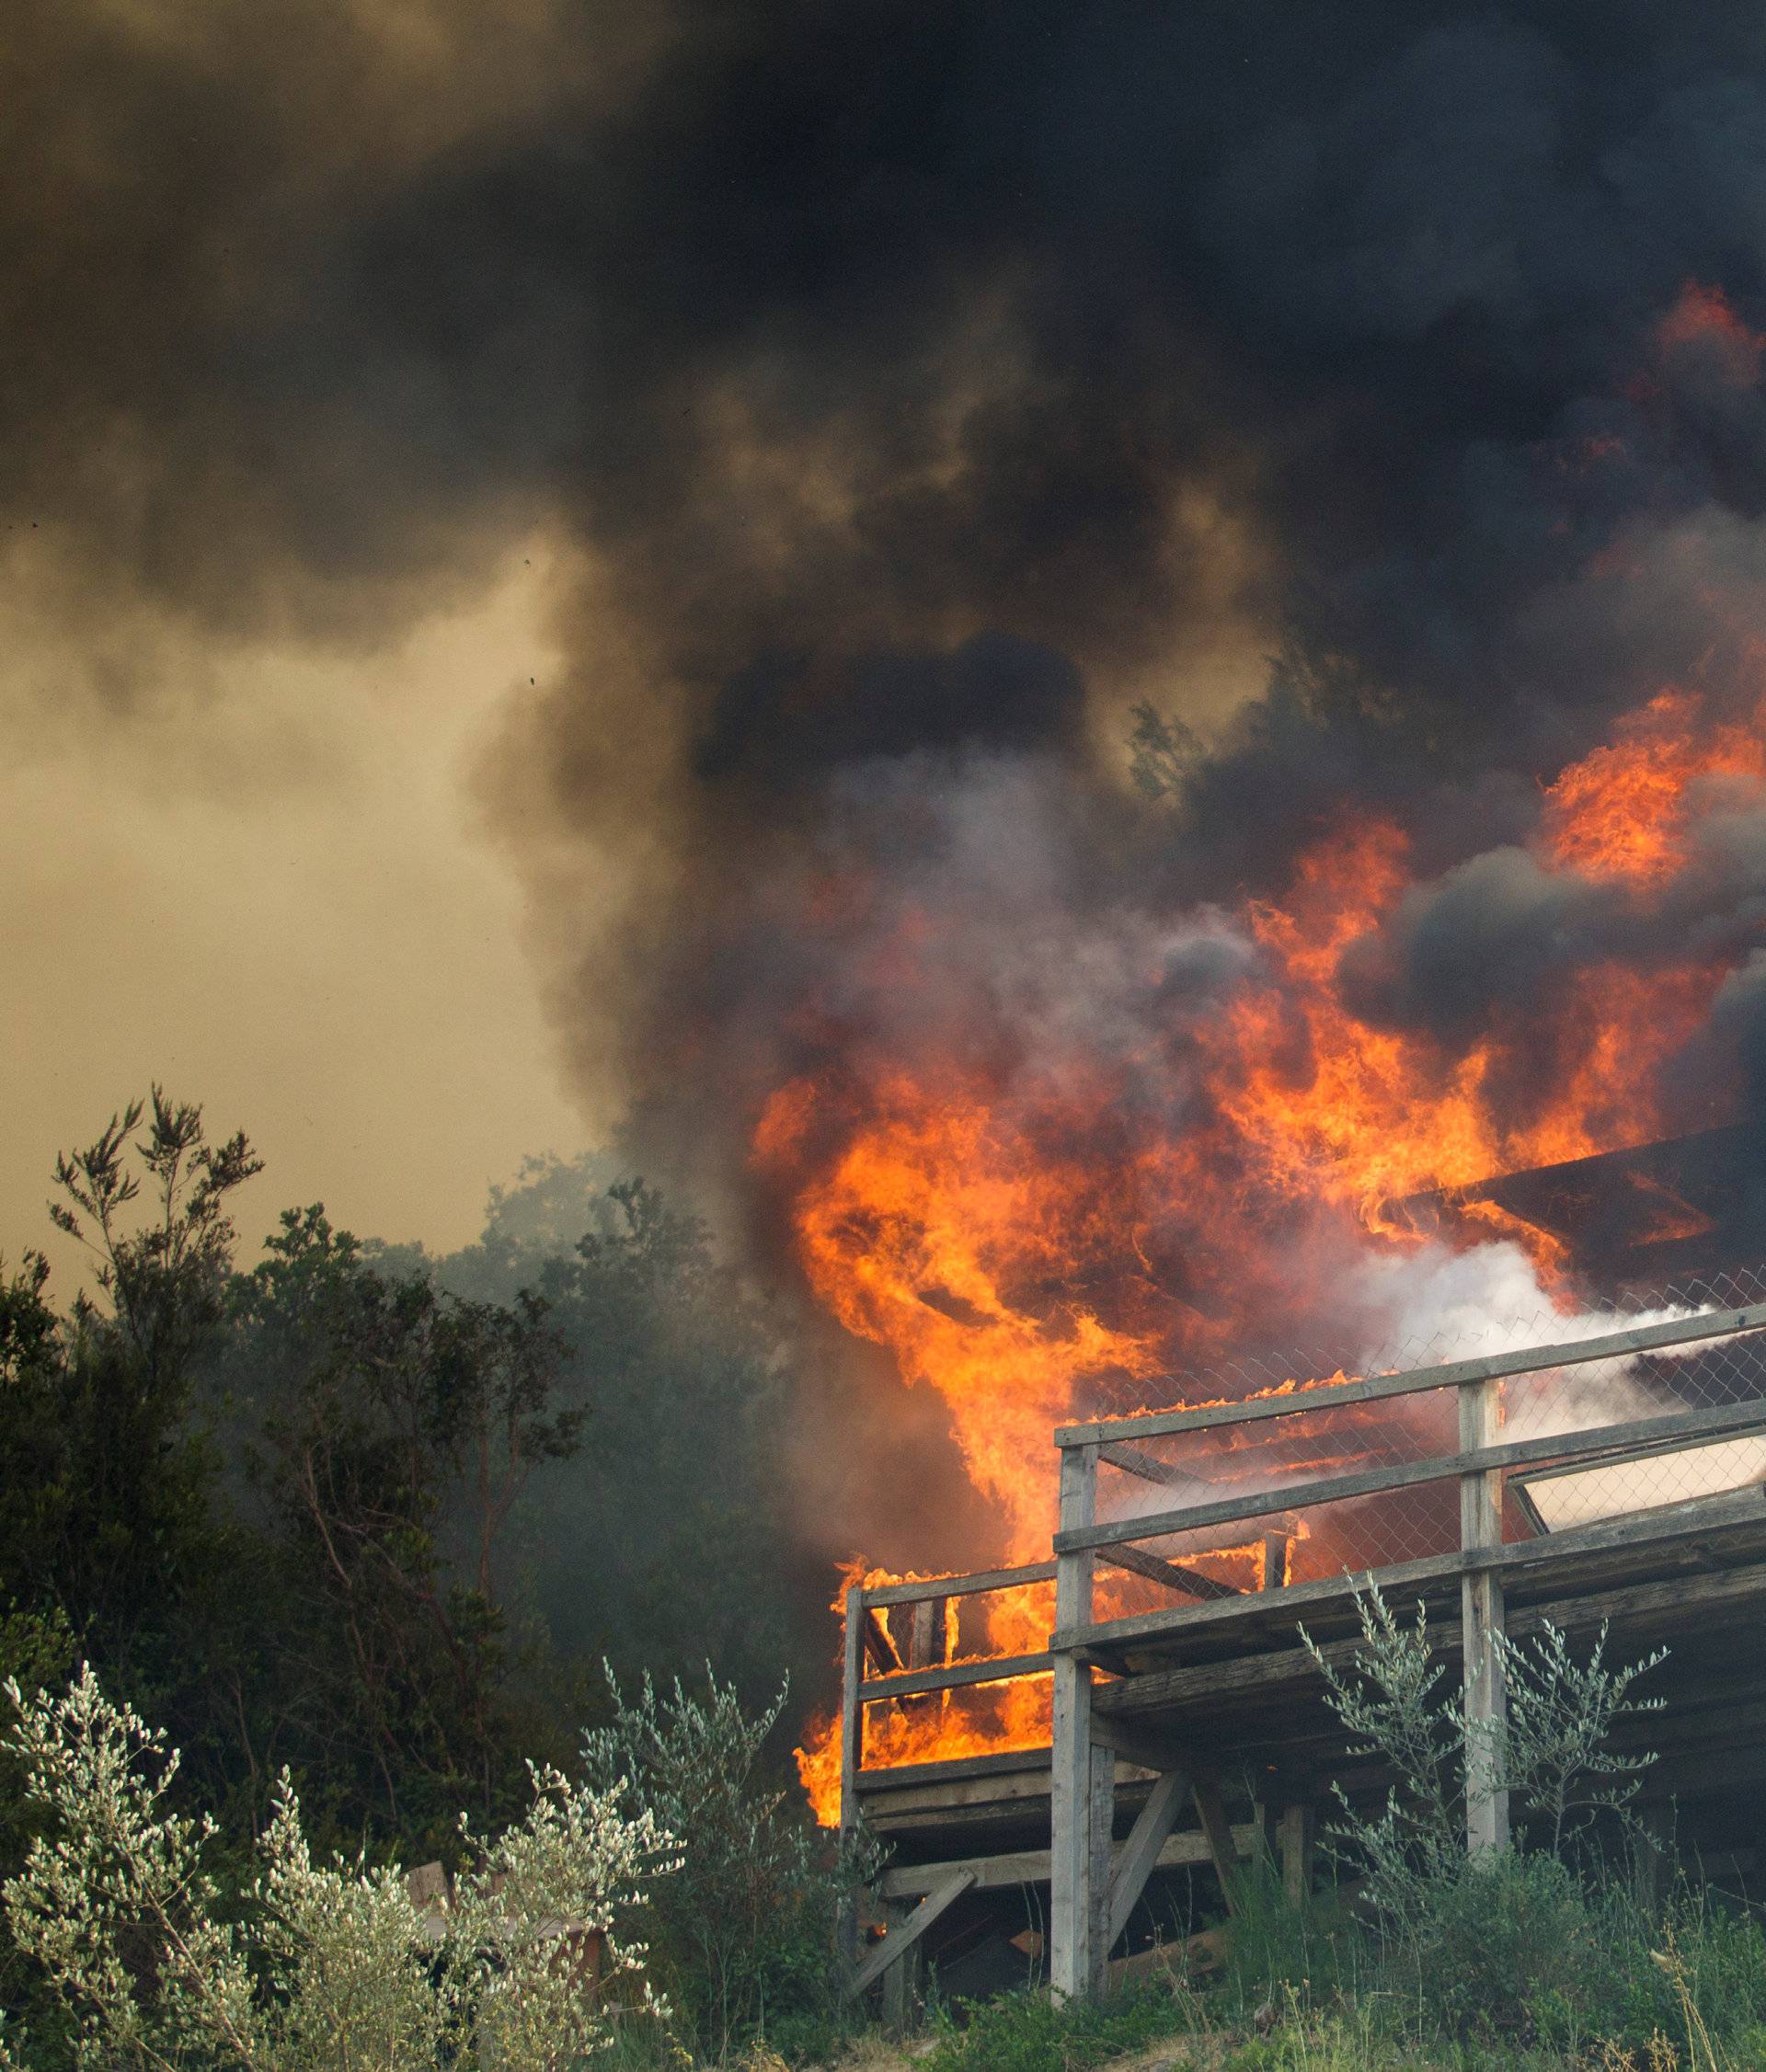 A cabin burns during a forest fire at Lustica peninsula near Tivat